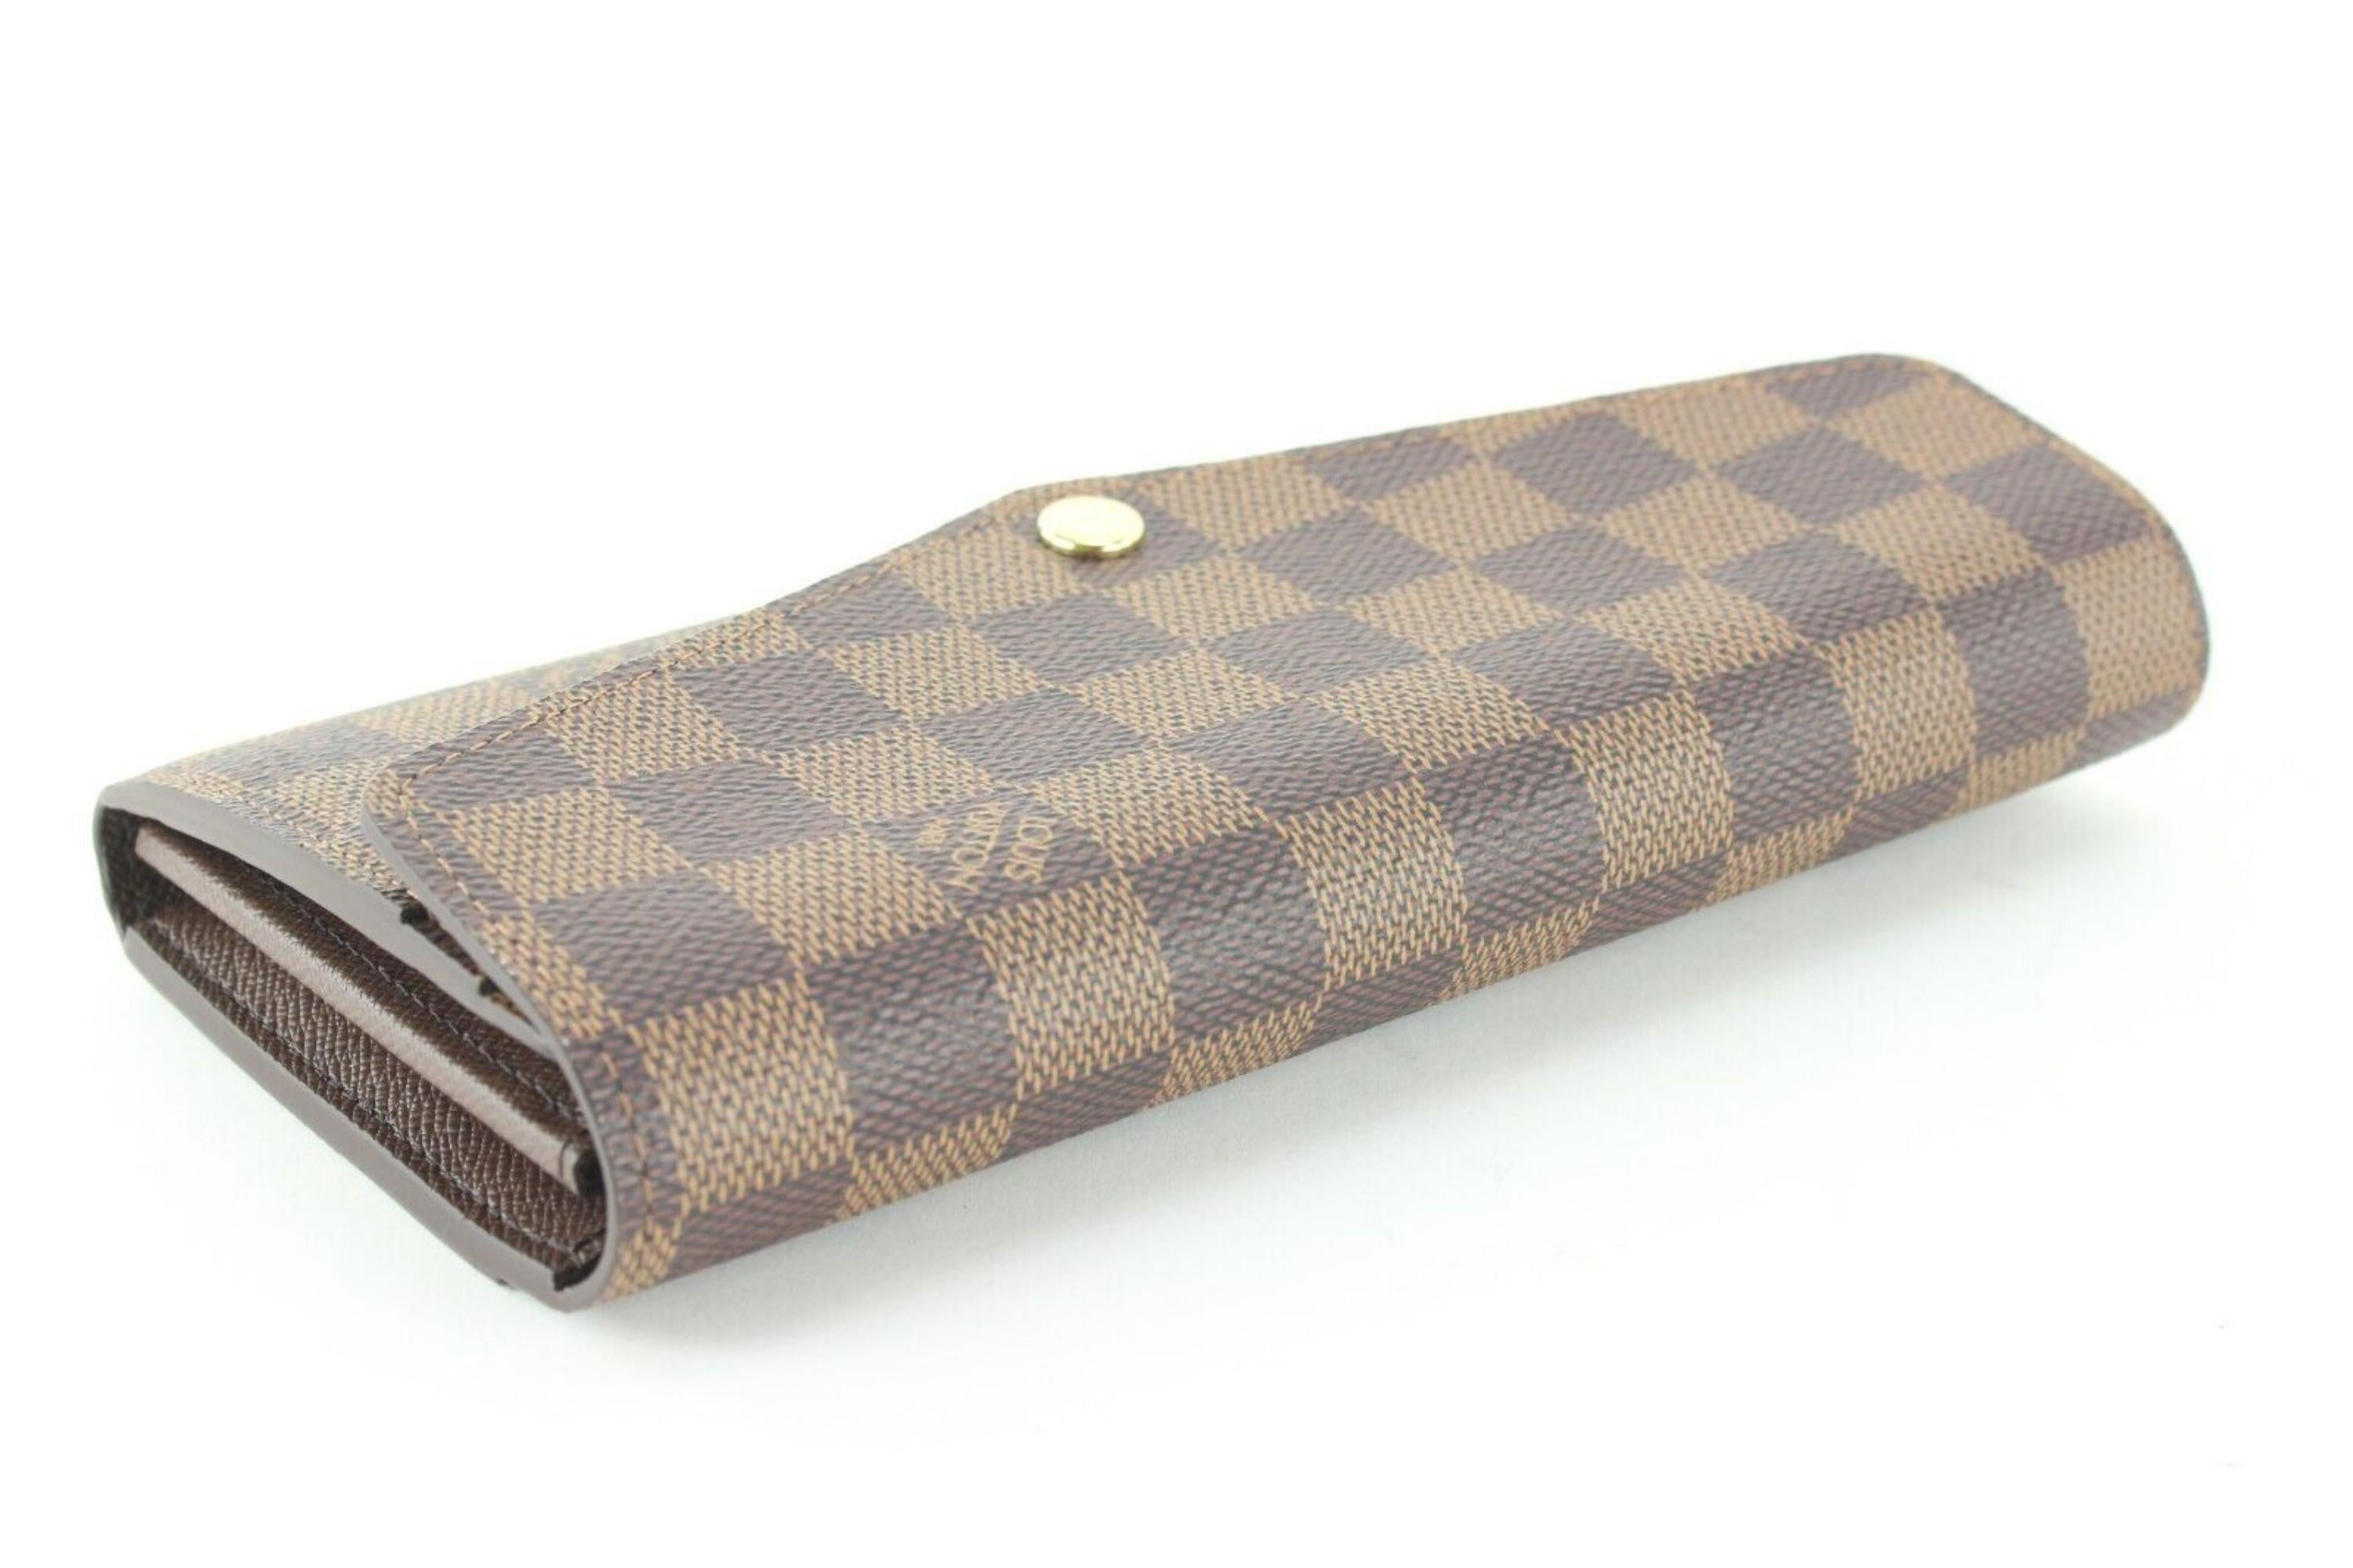 Louis Vuitton Damier Ebene Porte Tresor Sarah Flap Wallet 1LK0105 In New Condition For Sale In Dix hills, NY